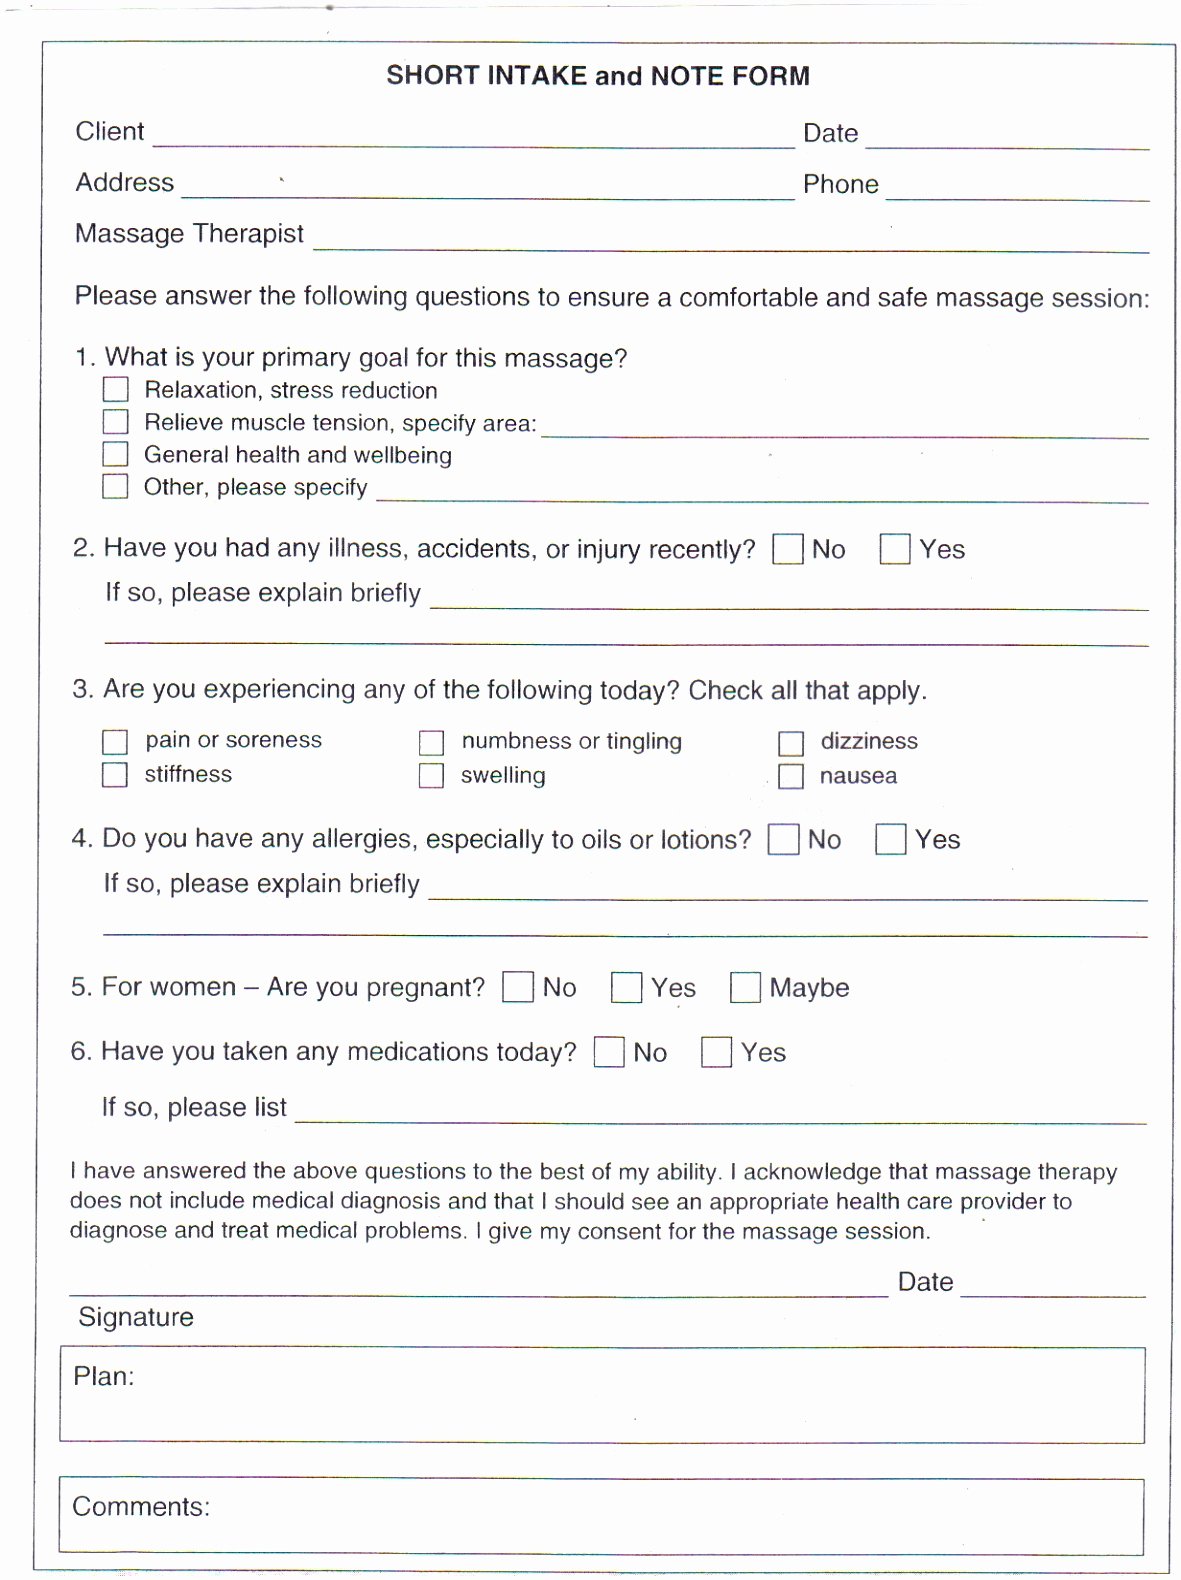 Client Intake form Template Awesome Client Intake forms Printable Client Intake form